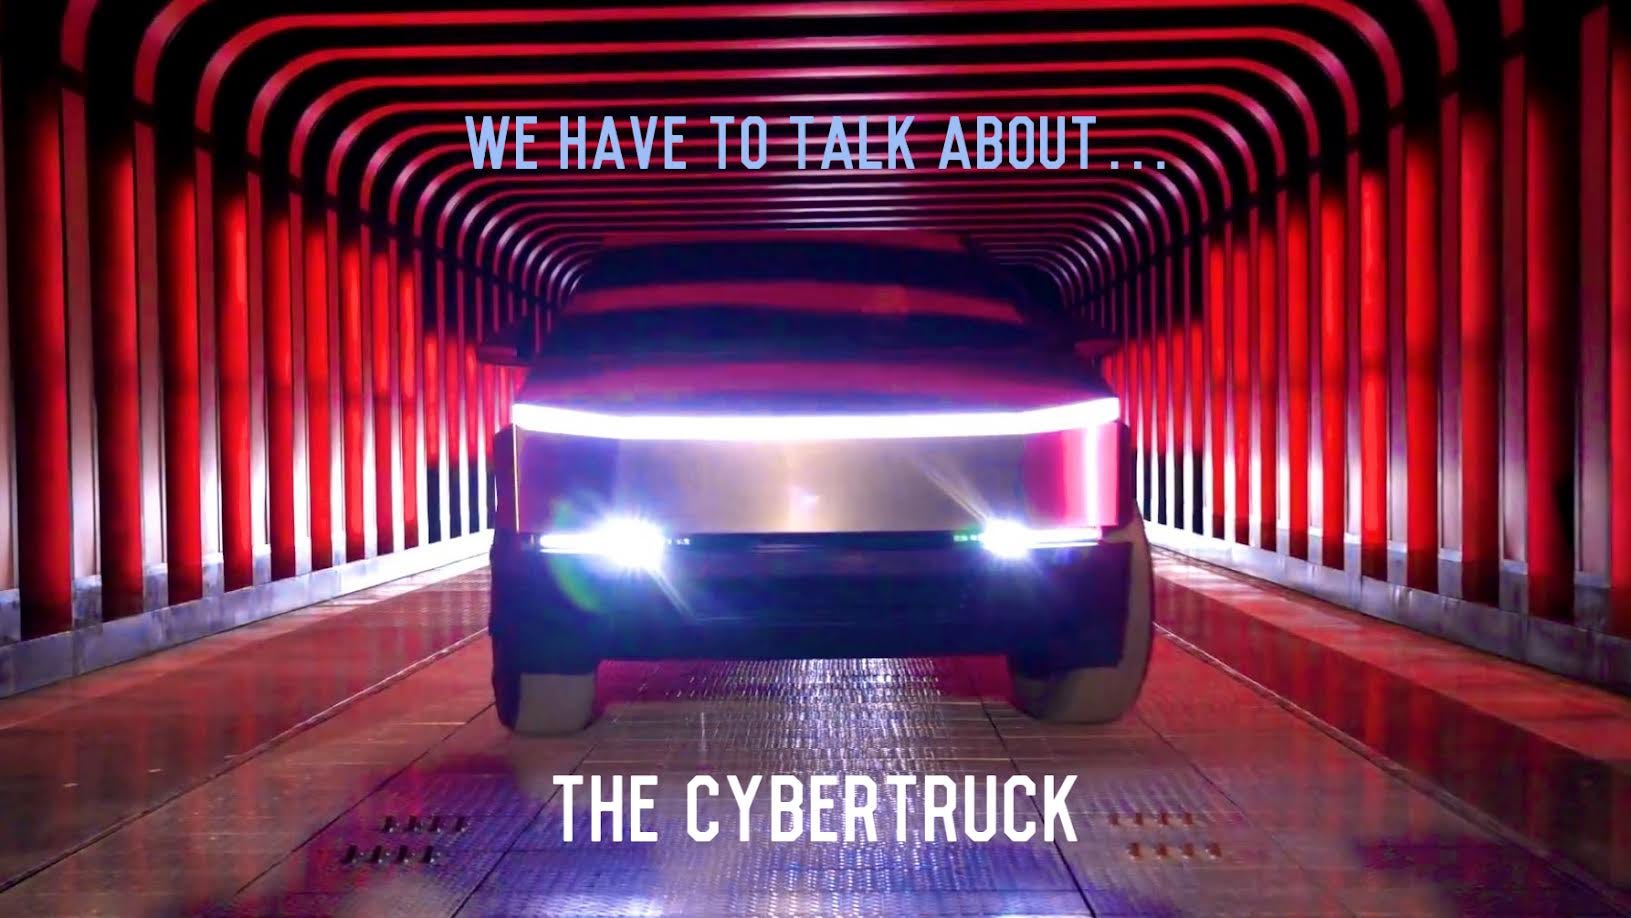 Safety professionals weigh in on Tesla's Cybertruck